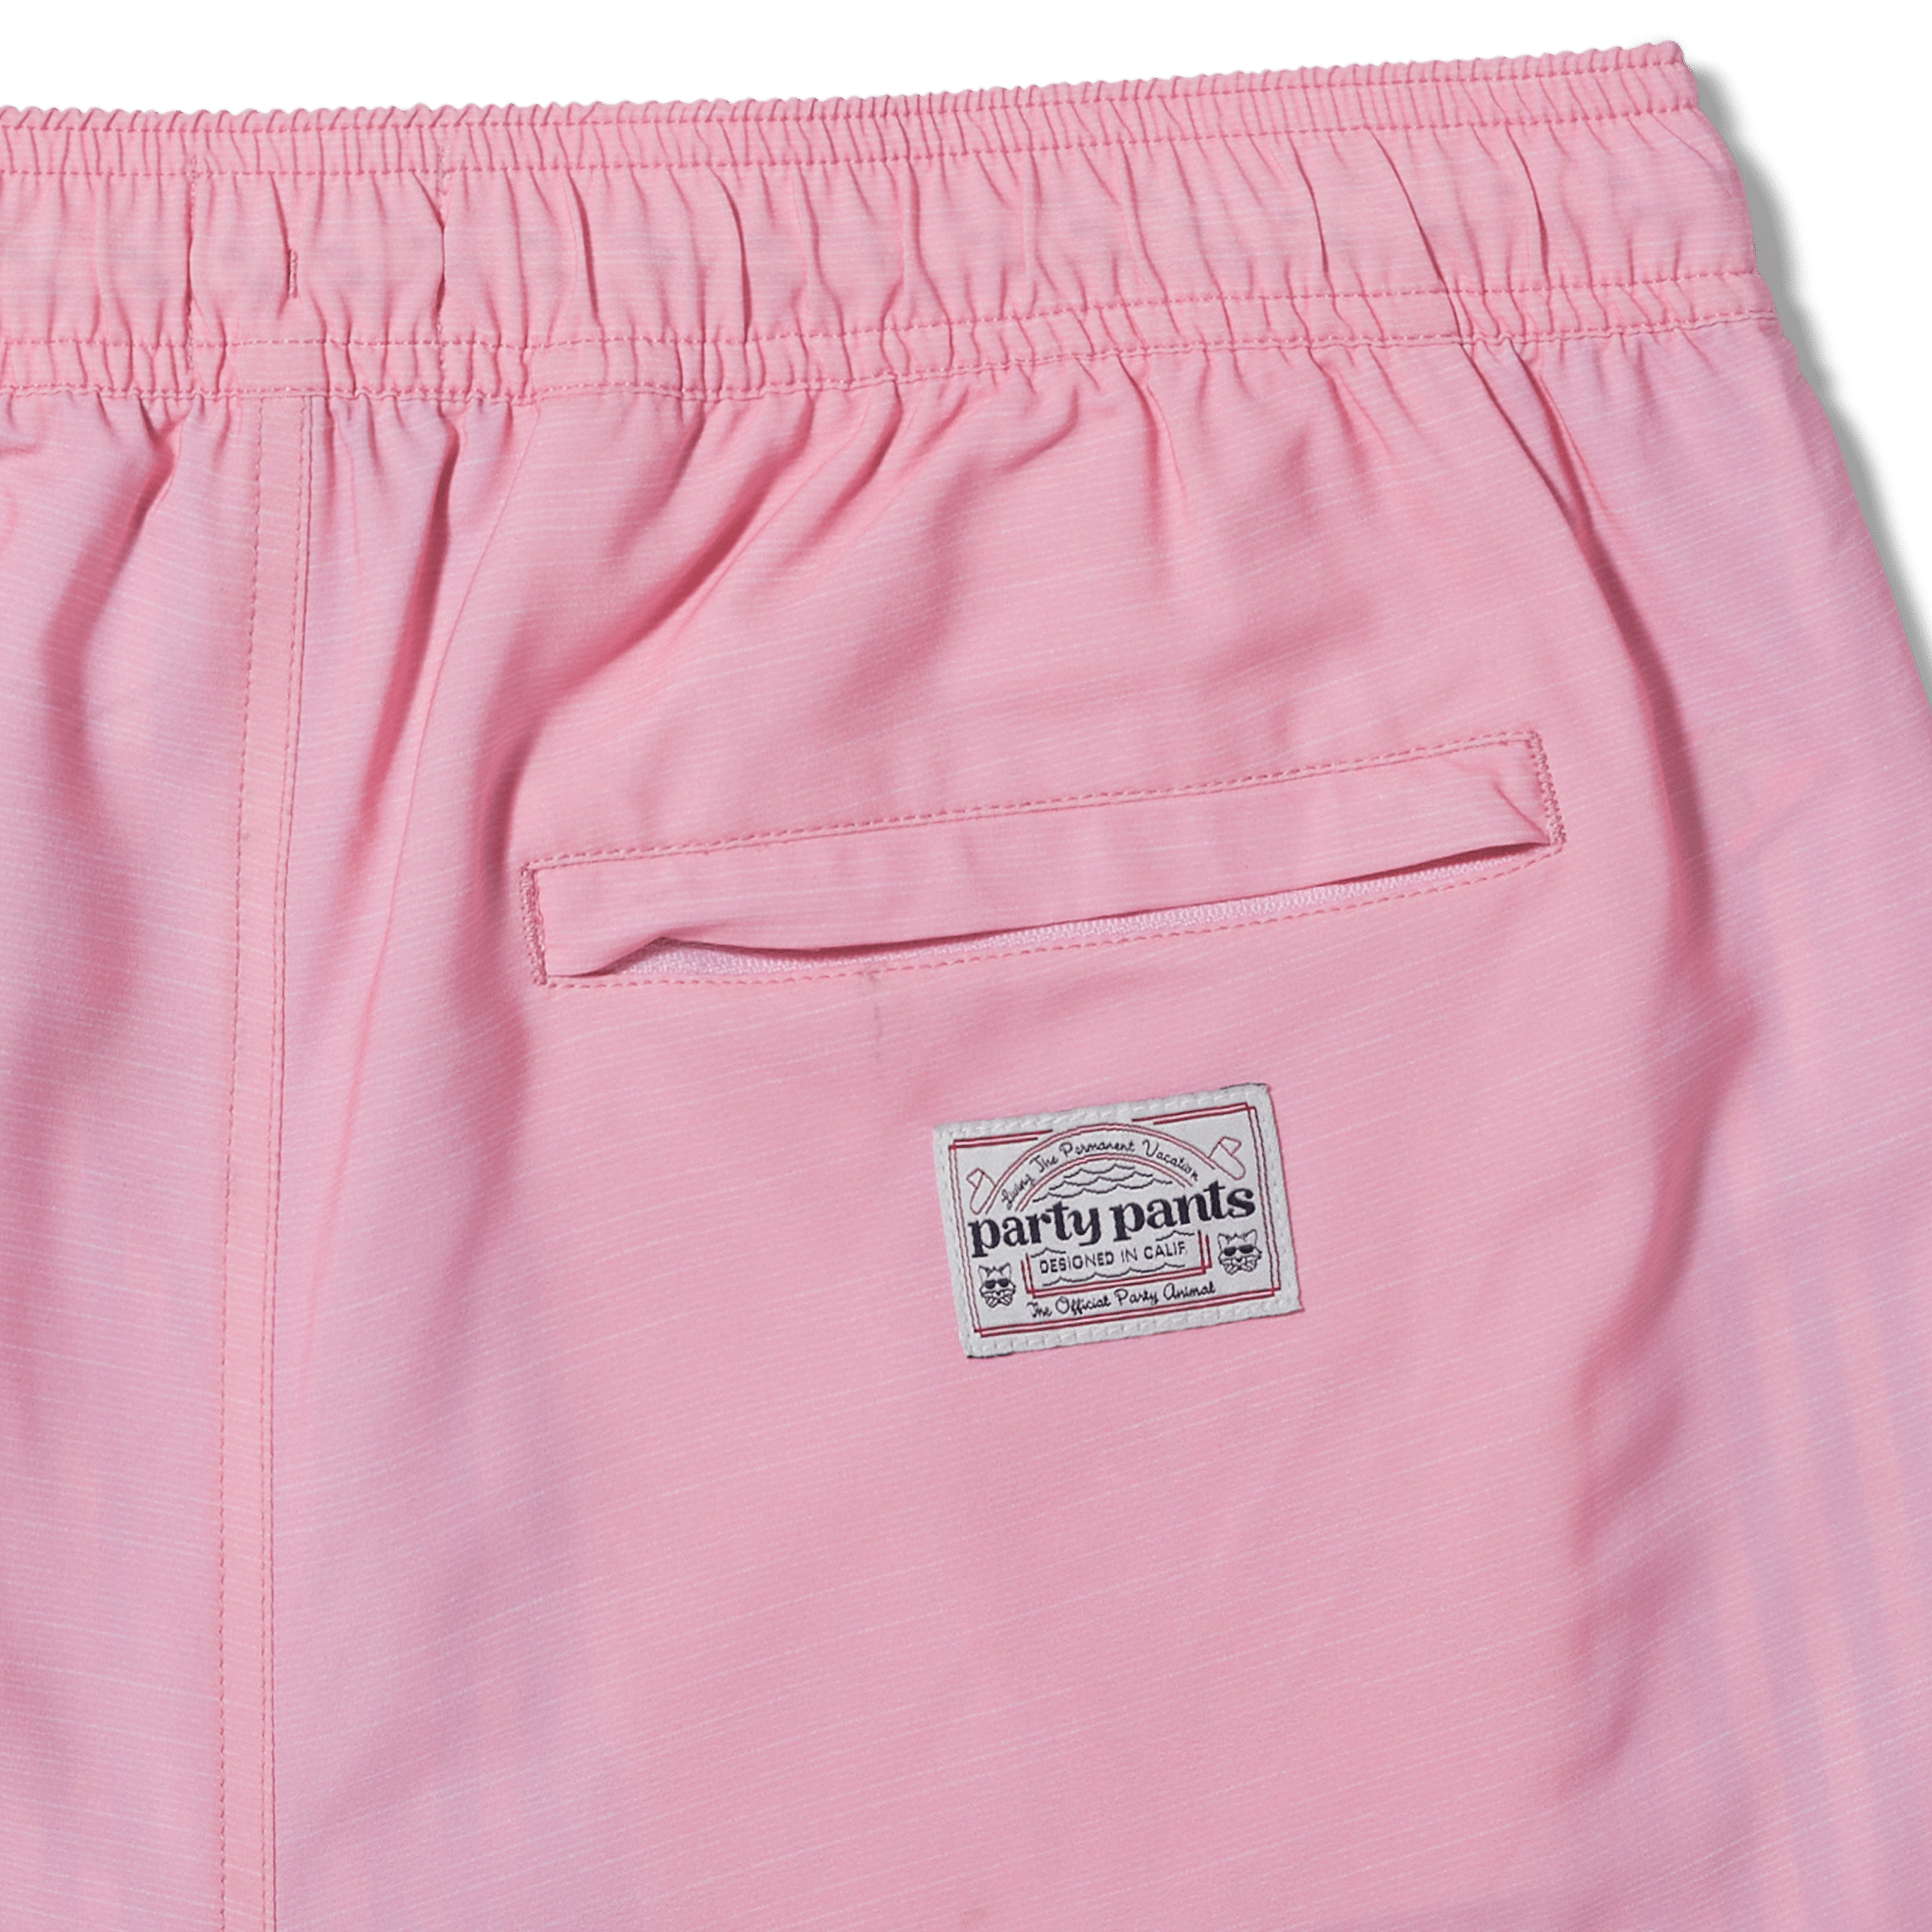 SOLID TEX LIL RIP SPORT LINED SHORT - PINK SPORT SHORTS PARTY PANTS 